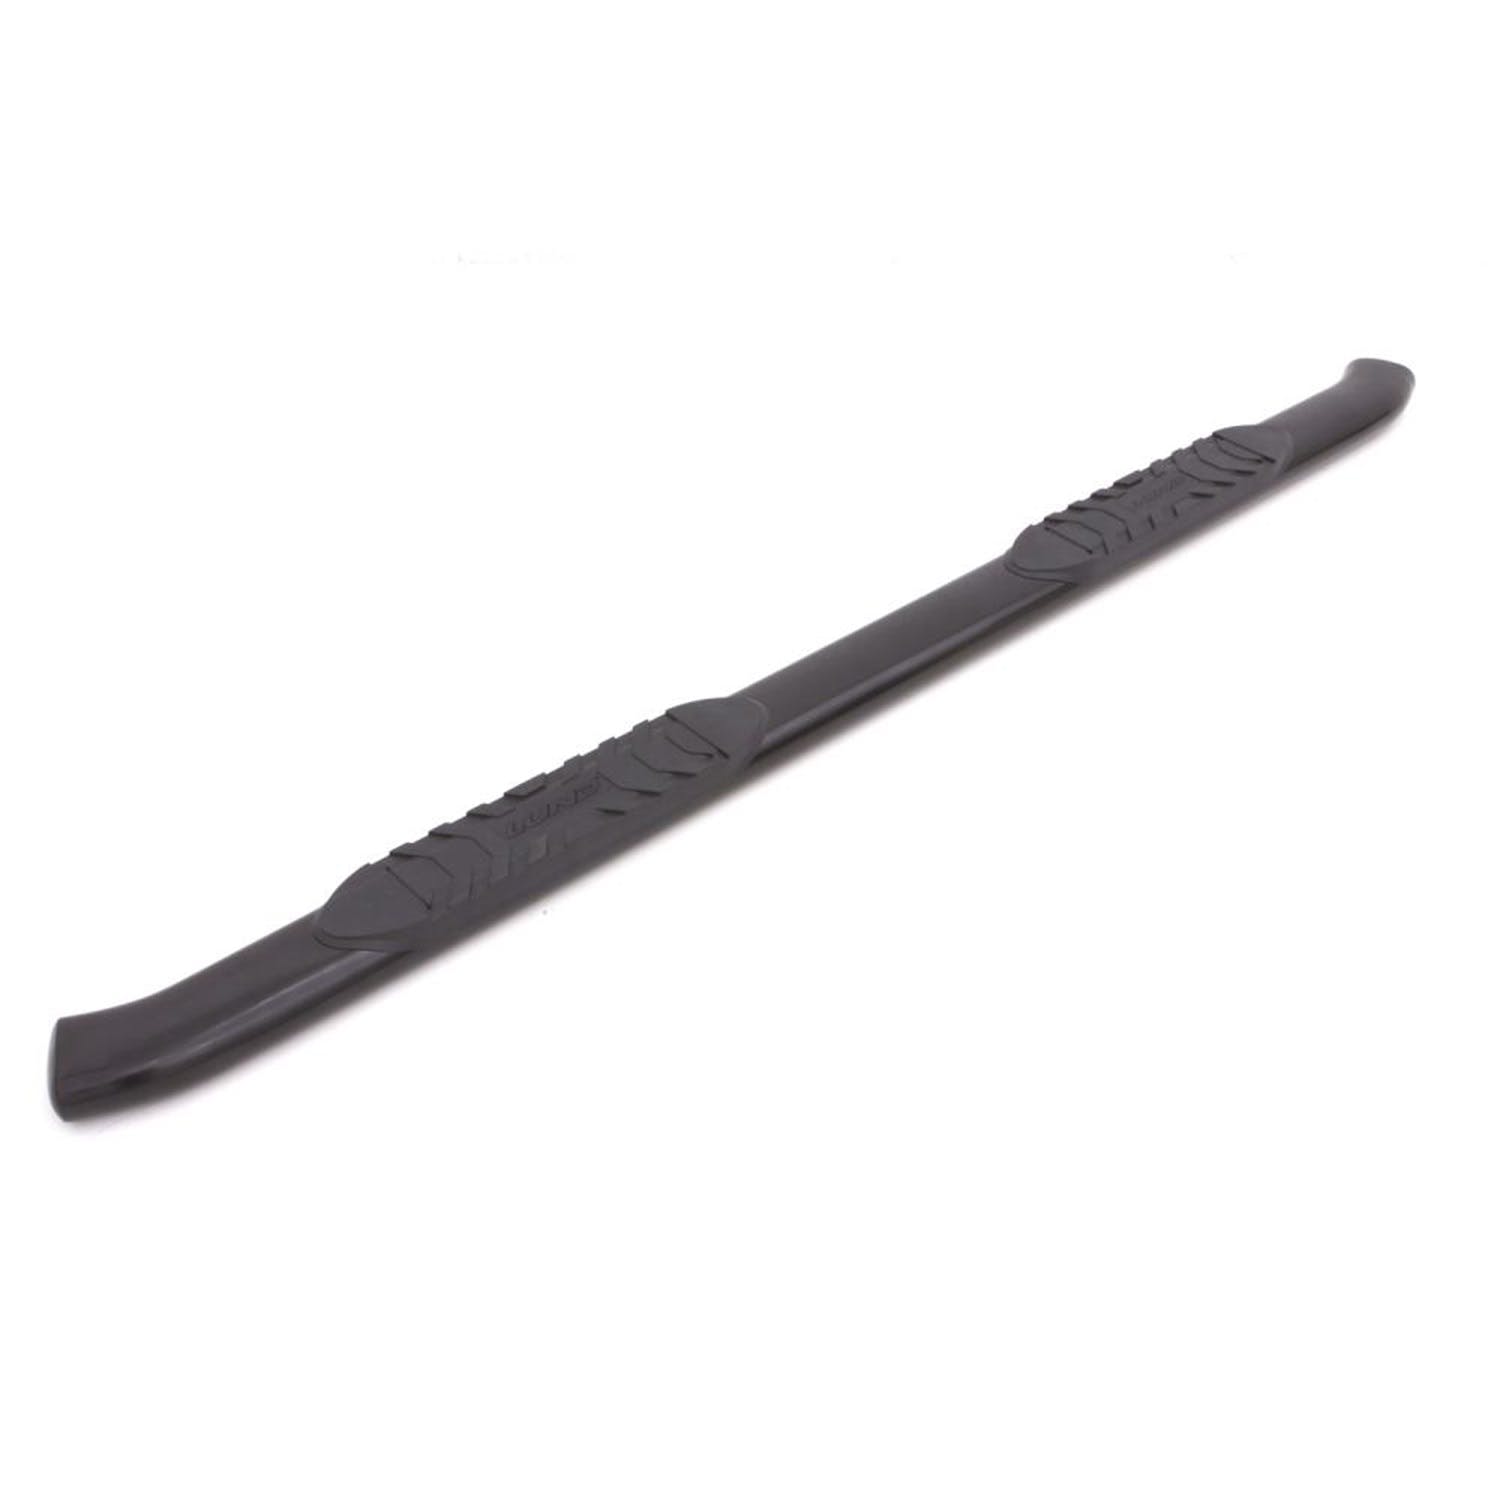 LUND 24285007 5 Inch Oval Curved Nerf Bar - Black LUND -5 inch CURVED OVAL BLACK SS